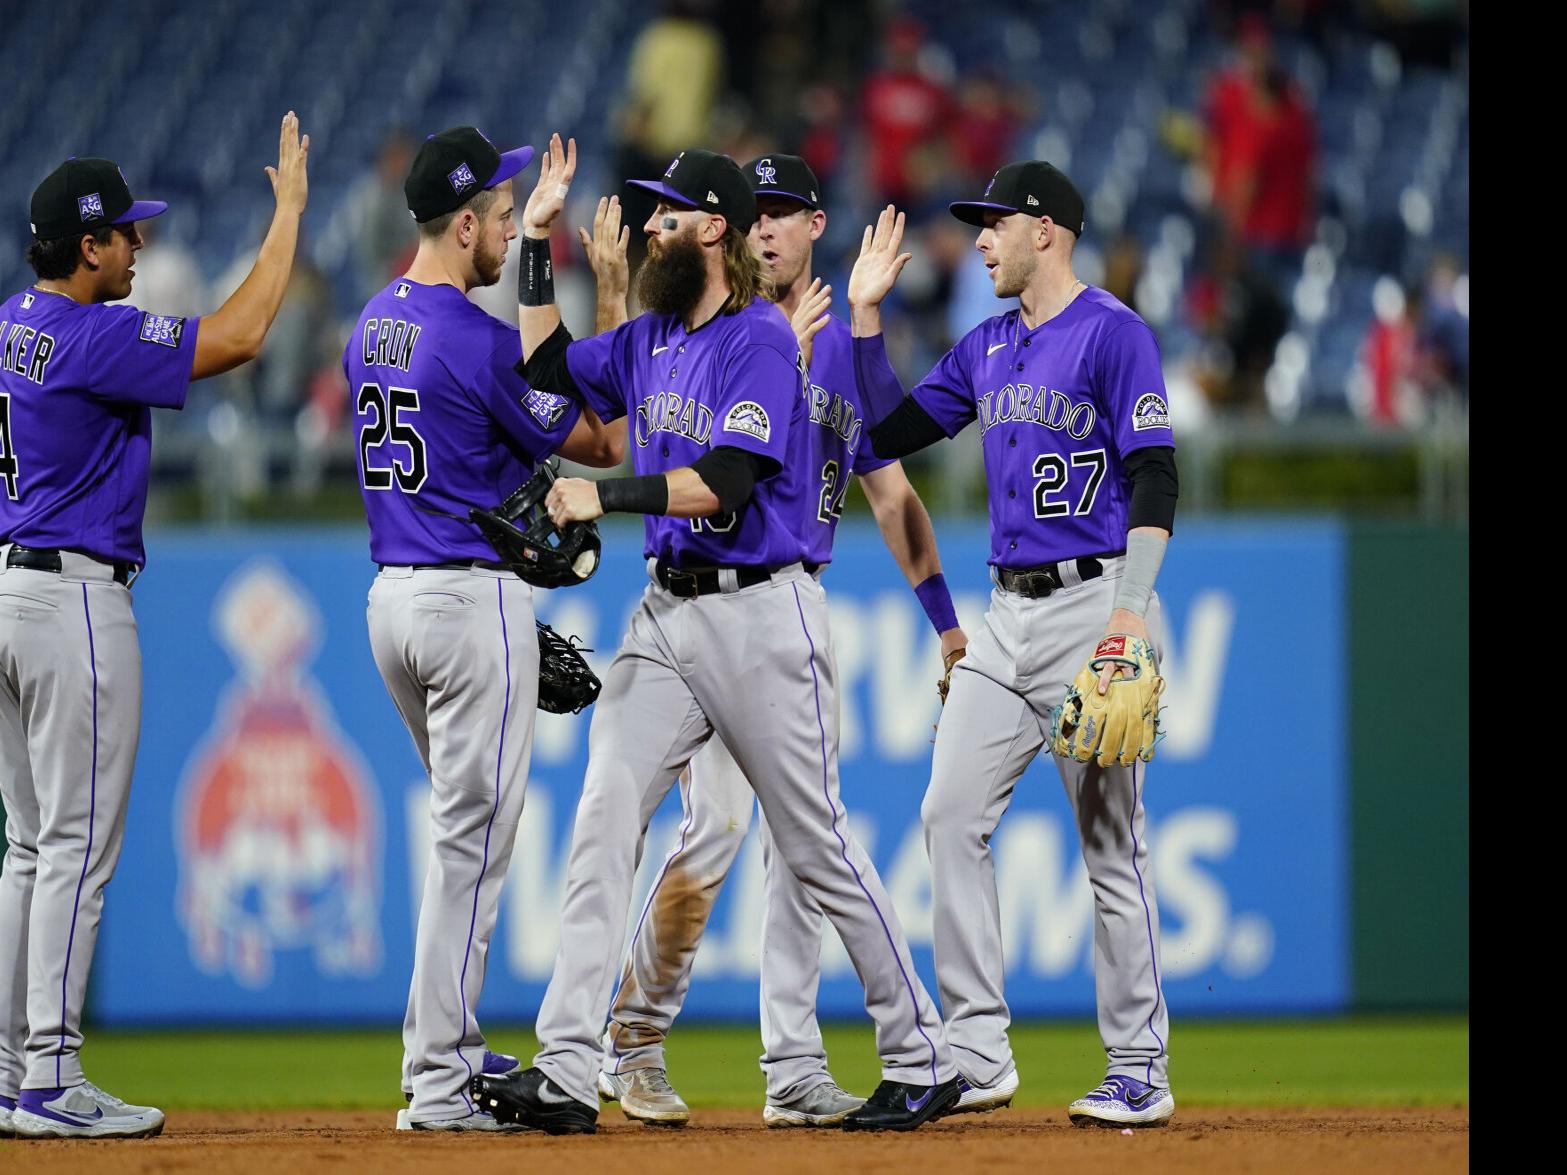 Rockies Journal: Who'll return to the playoffs first, Broncos or Rockies?